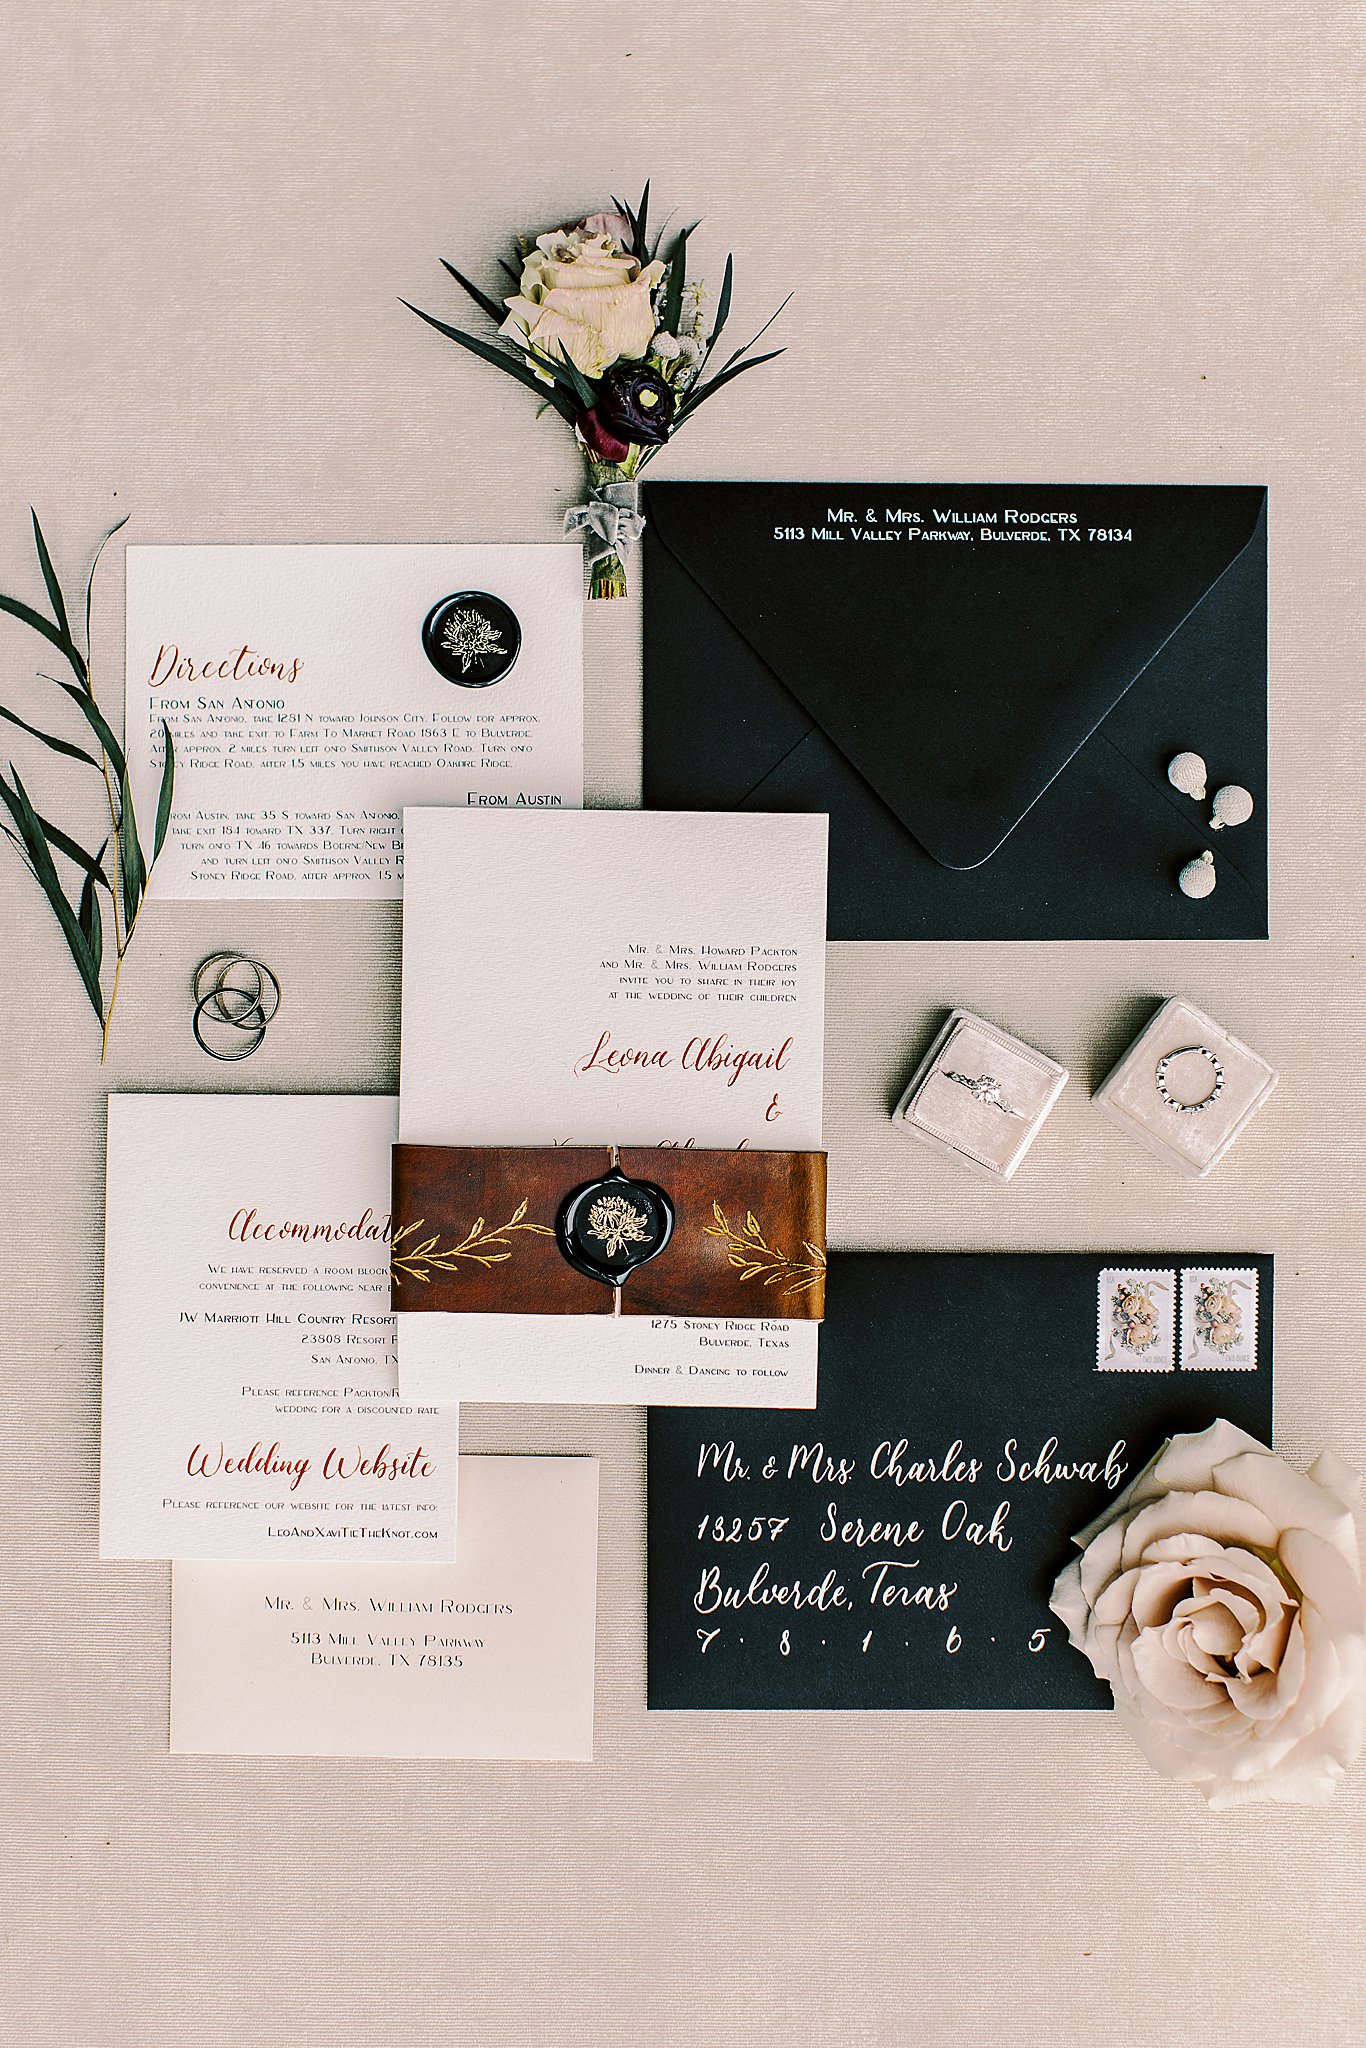 bulverde texas, oakfire ridge wedding reception invitation with leather and wax detailing